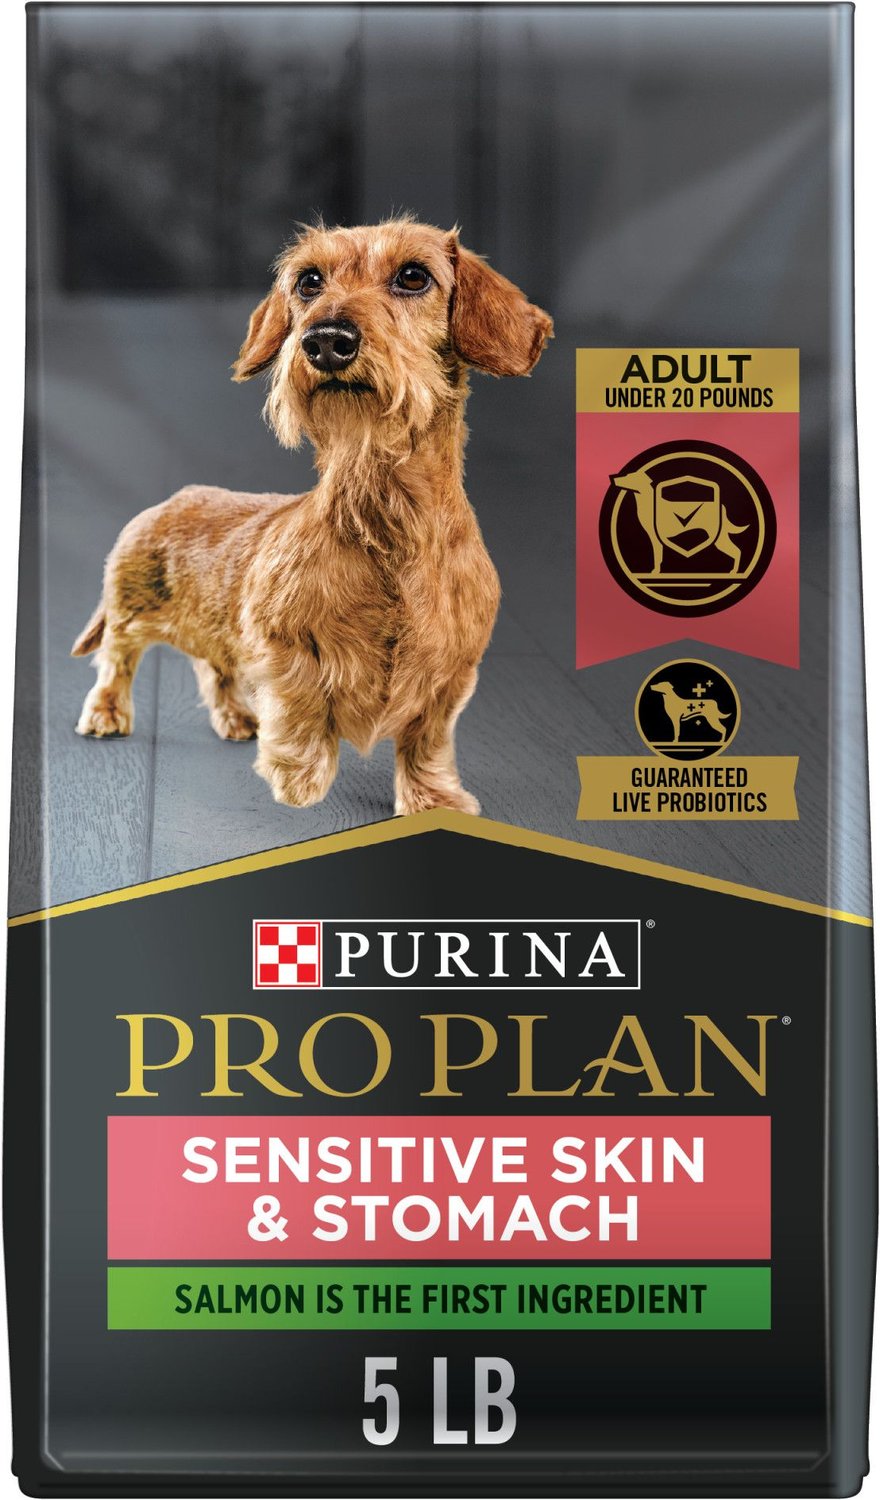 purina pro plan toy breed